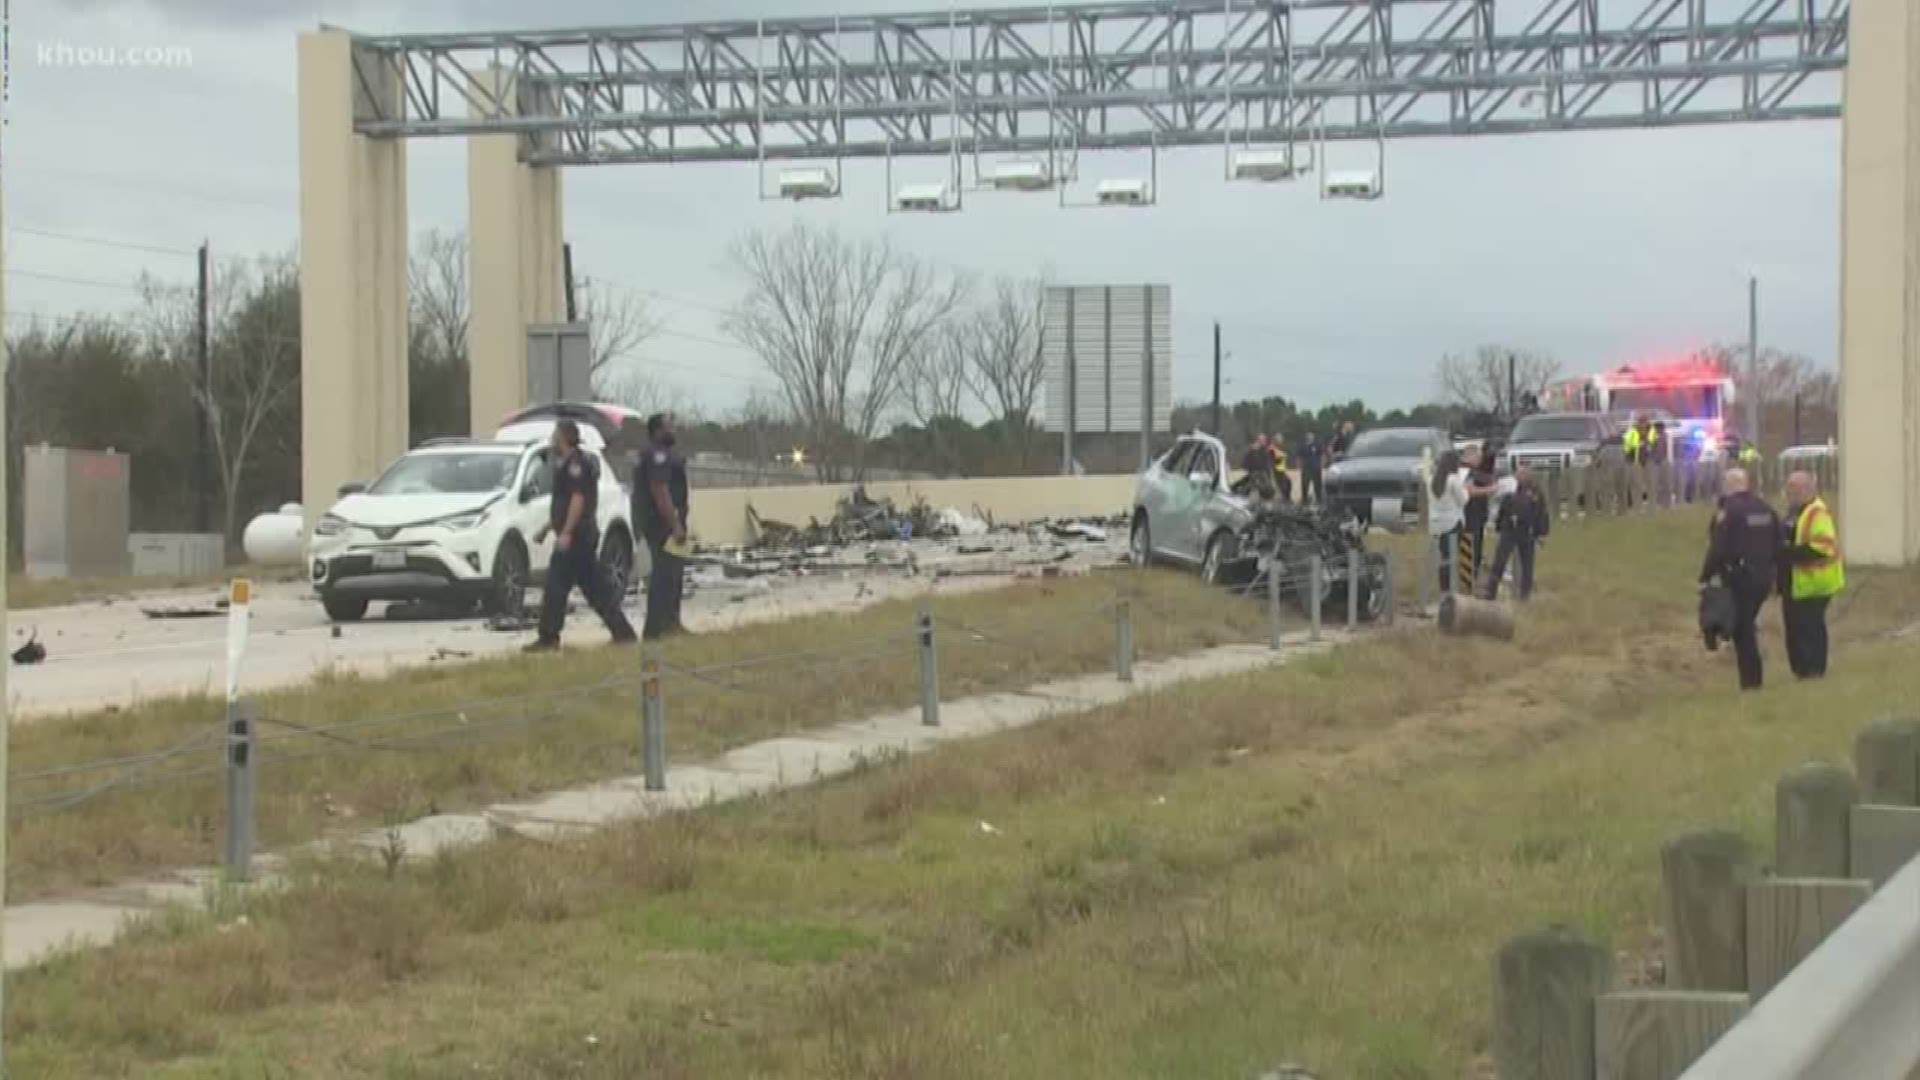 Two people were killed and five others were injured in a 7-vehicle crash that shut down main lanes shut down on the Grand Parkway near FM 2920.